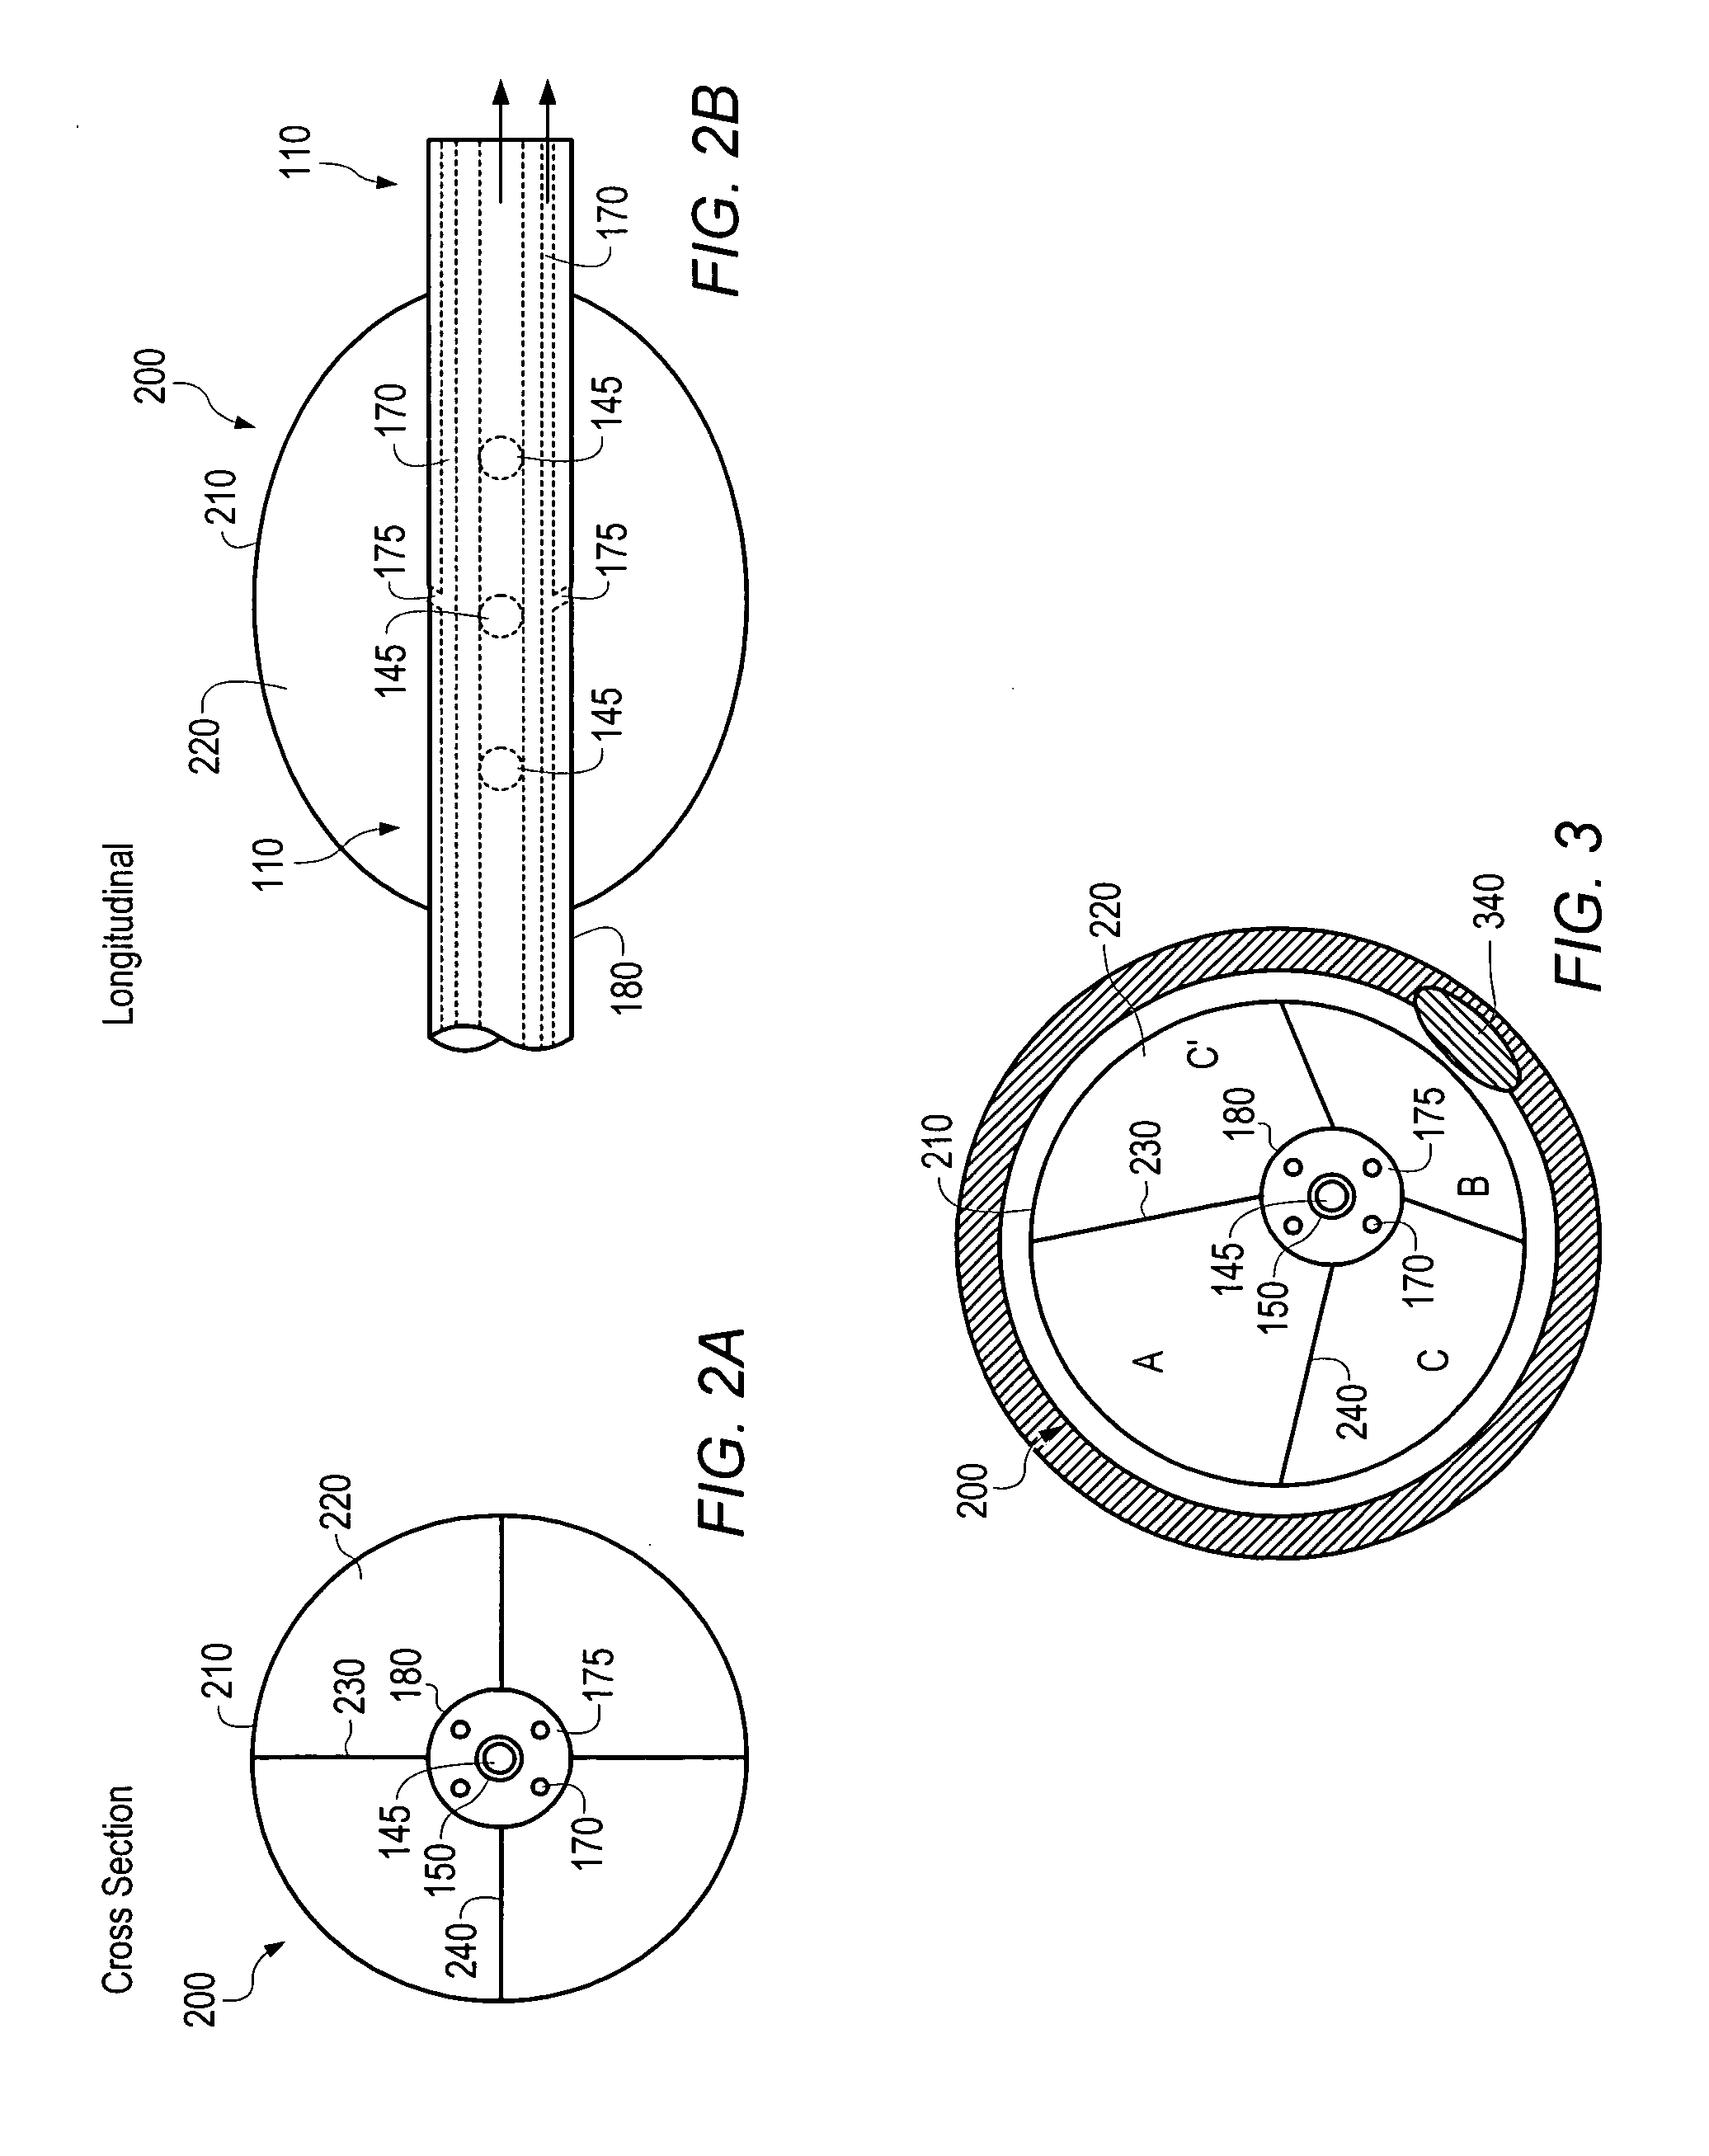 System and method for high dose rate radiation intracavitary brachytherapy